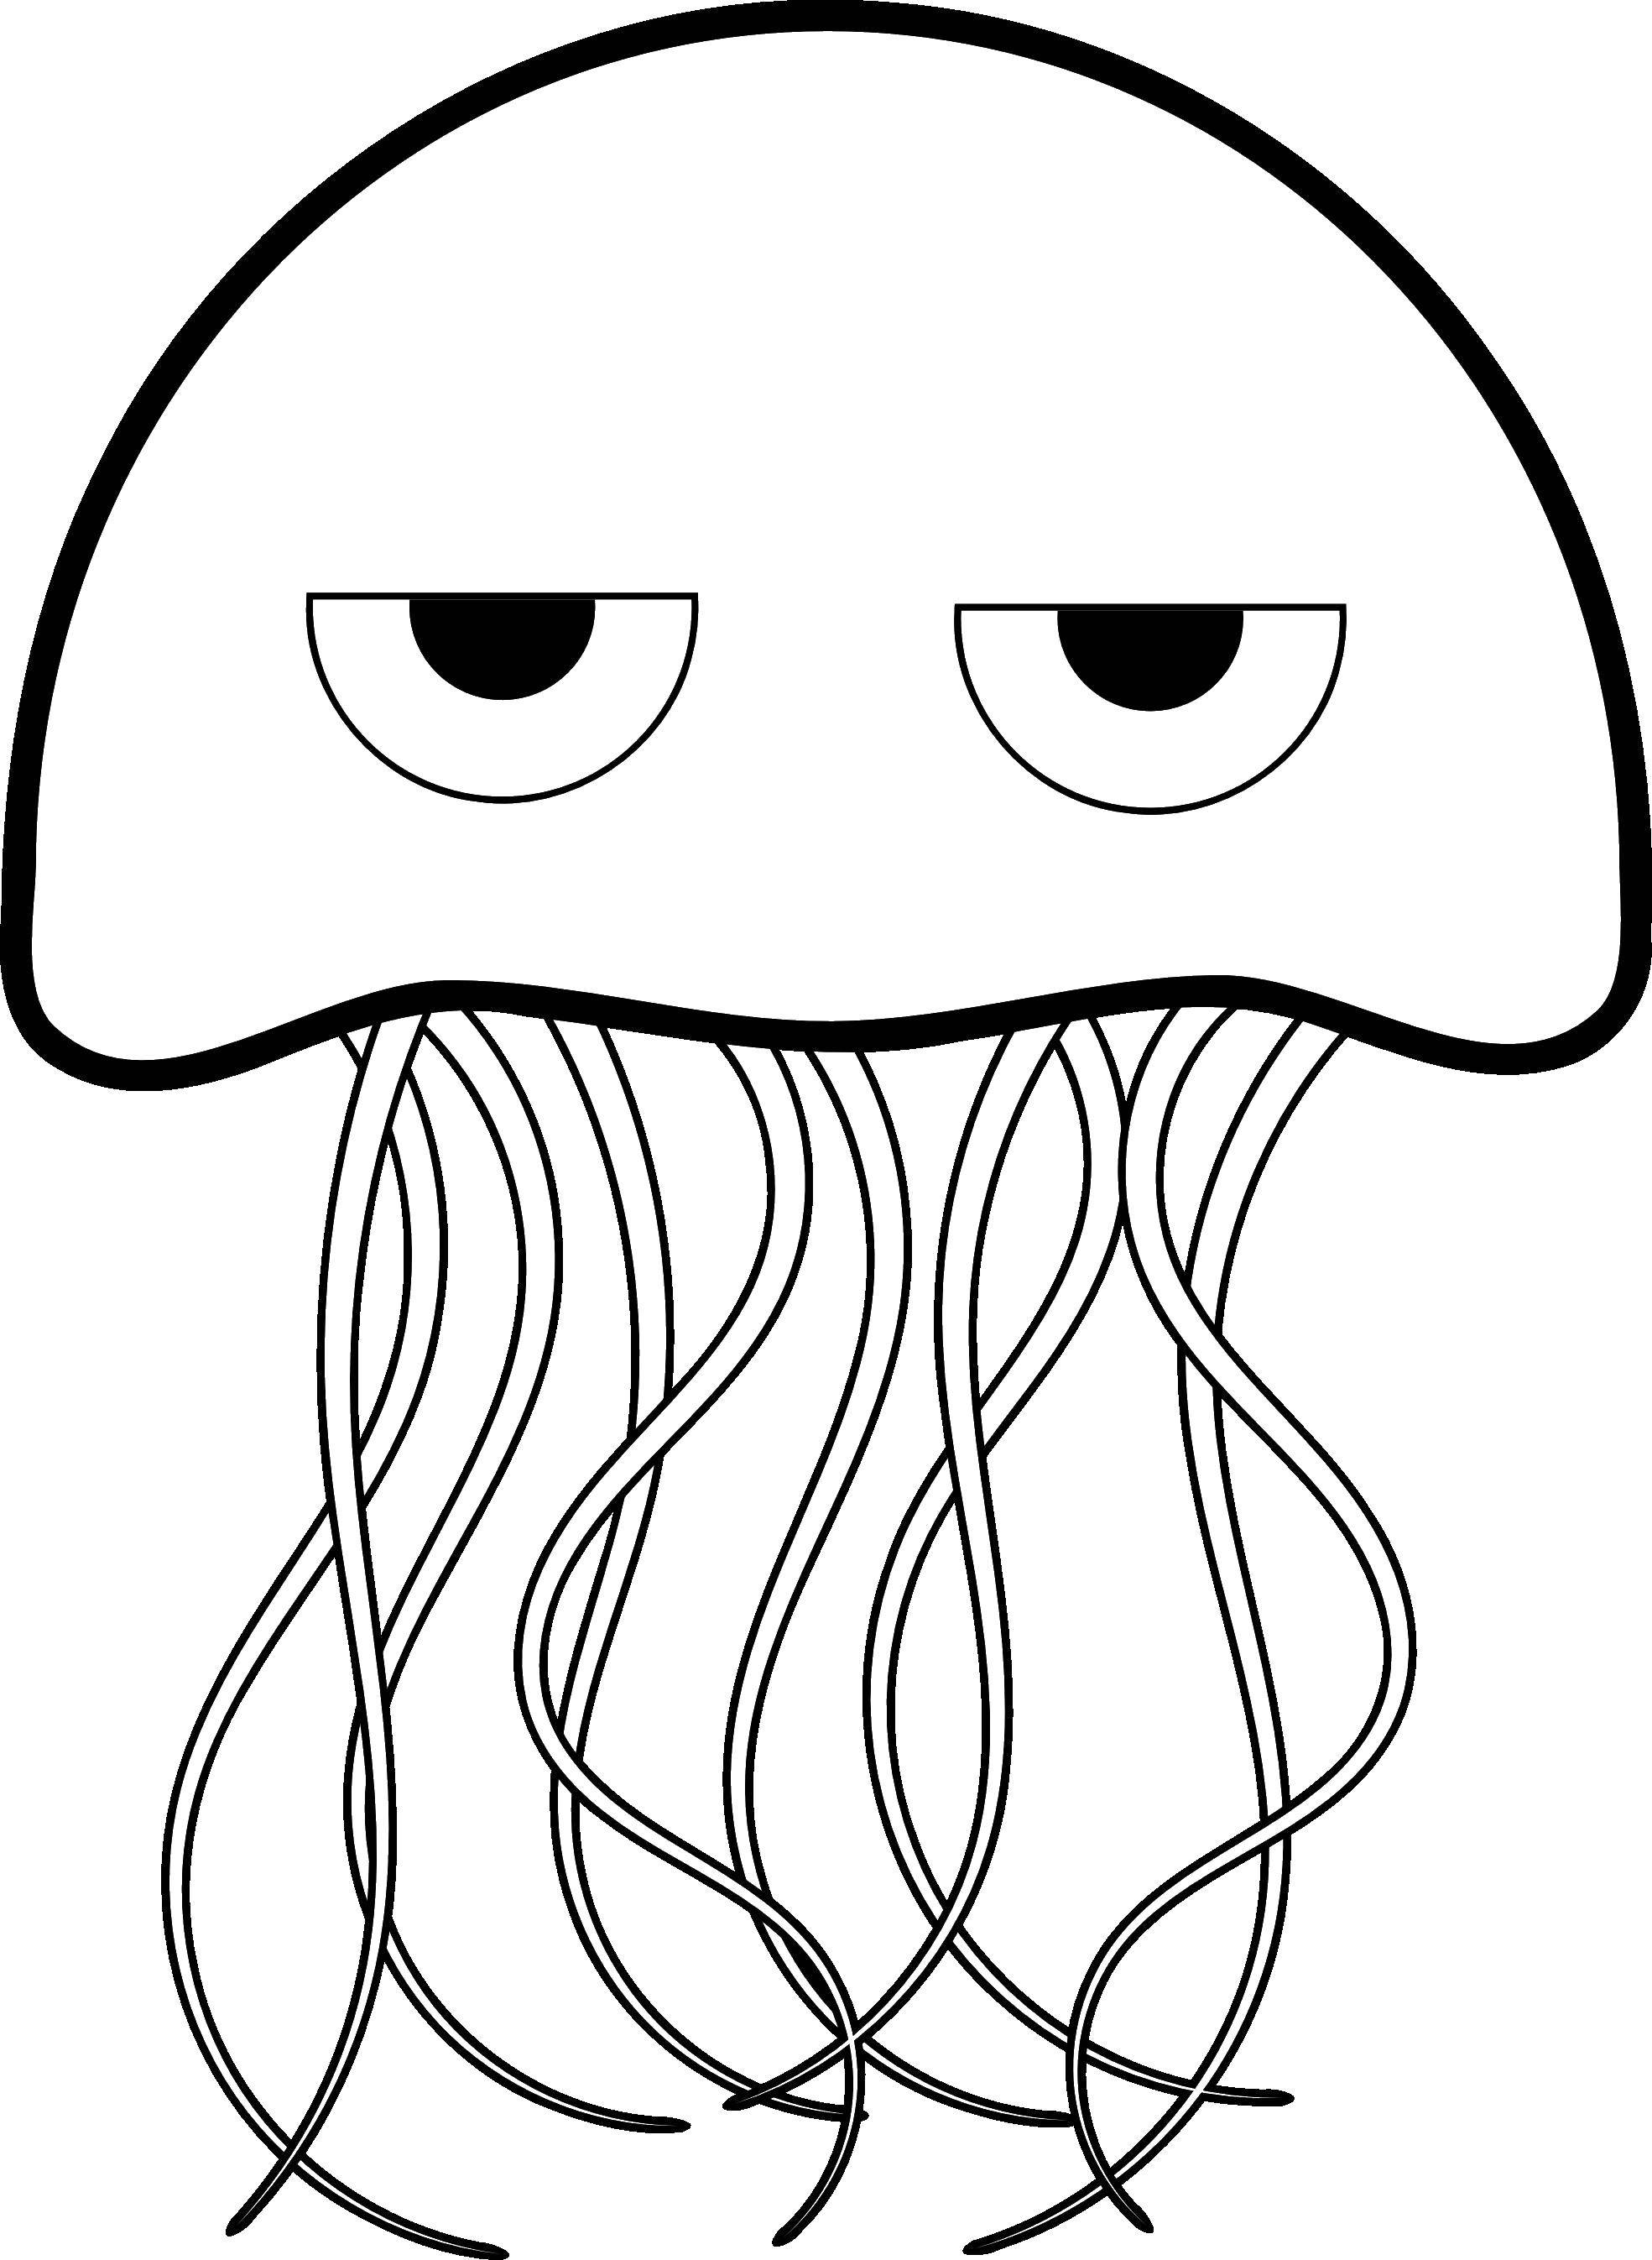 Coloring The evil Medusa. Category Sea animals. Tags:  Underwater world, jellyfish.